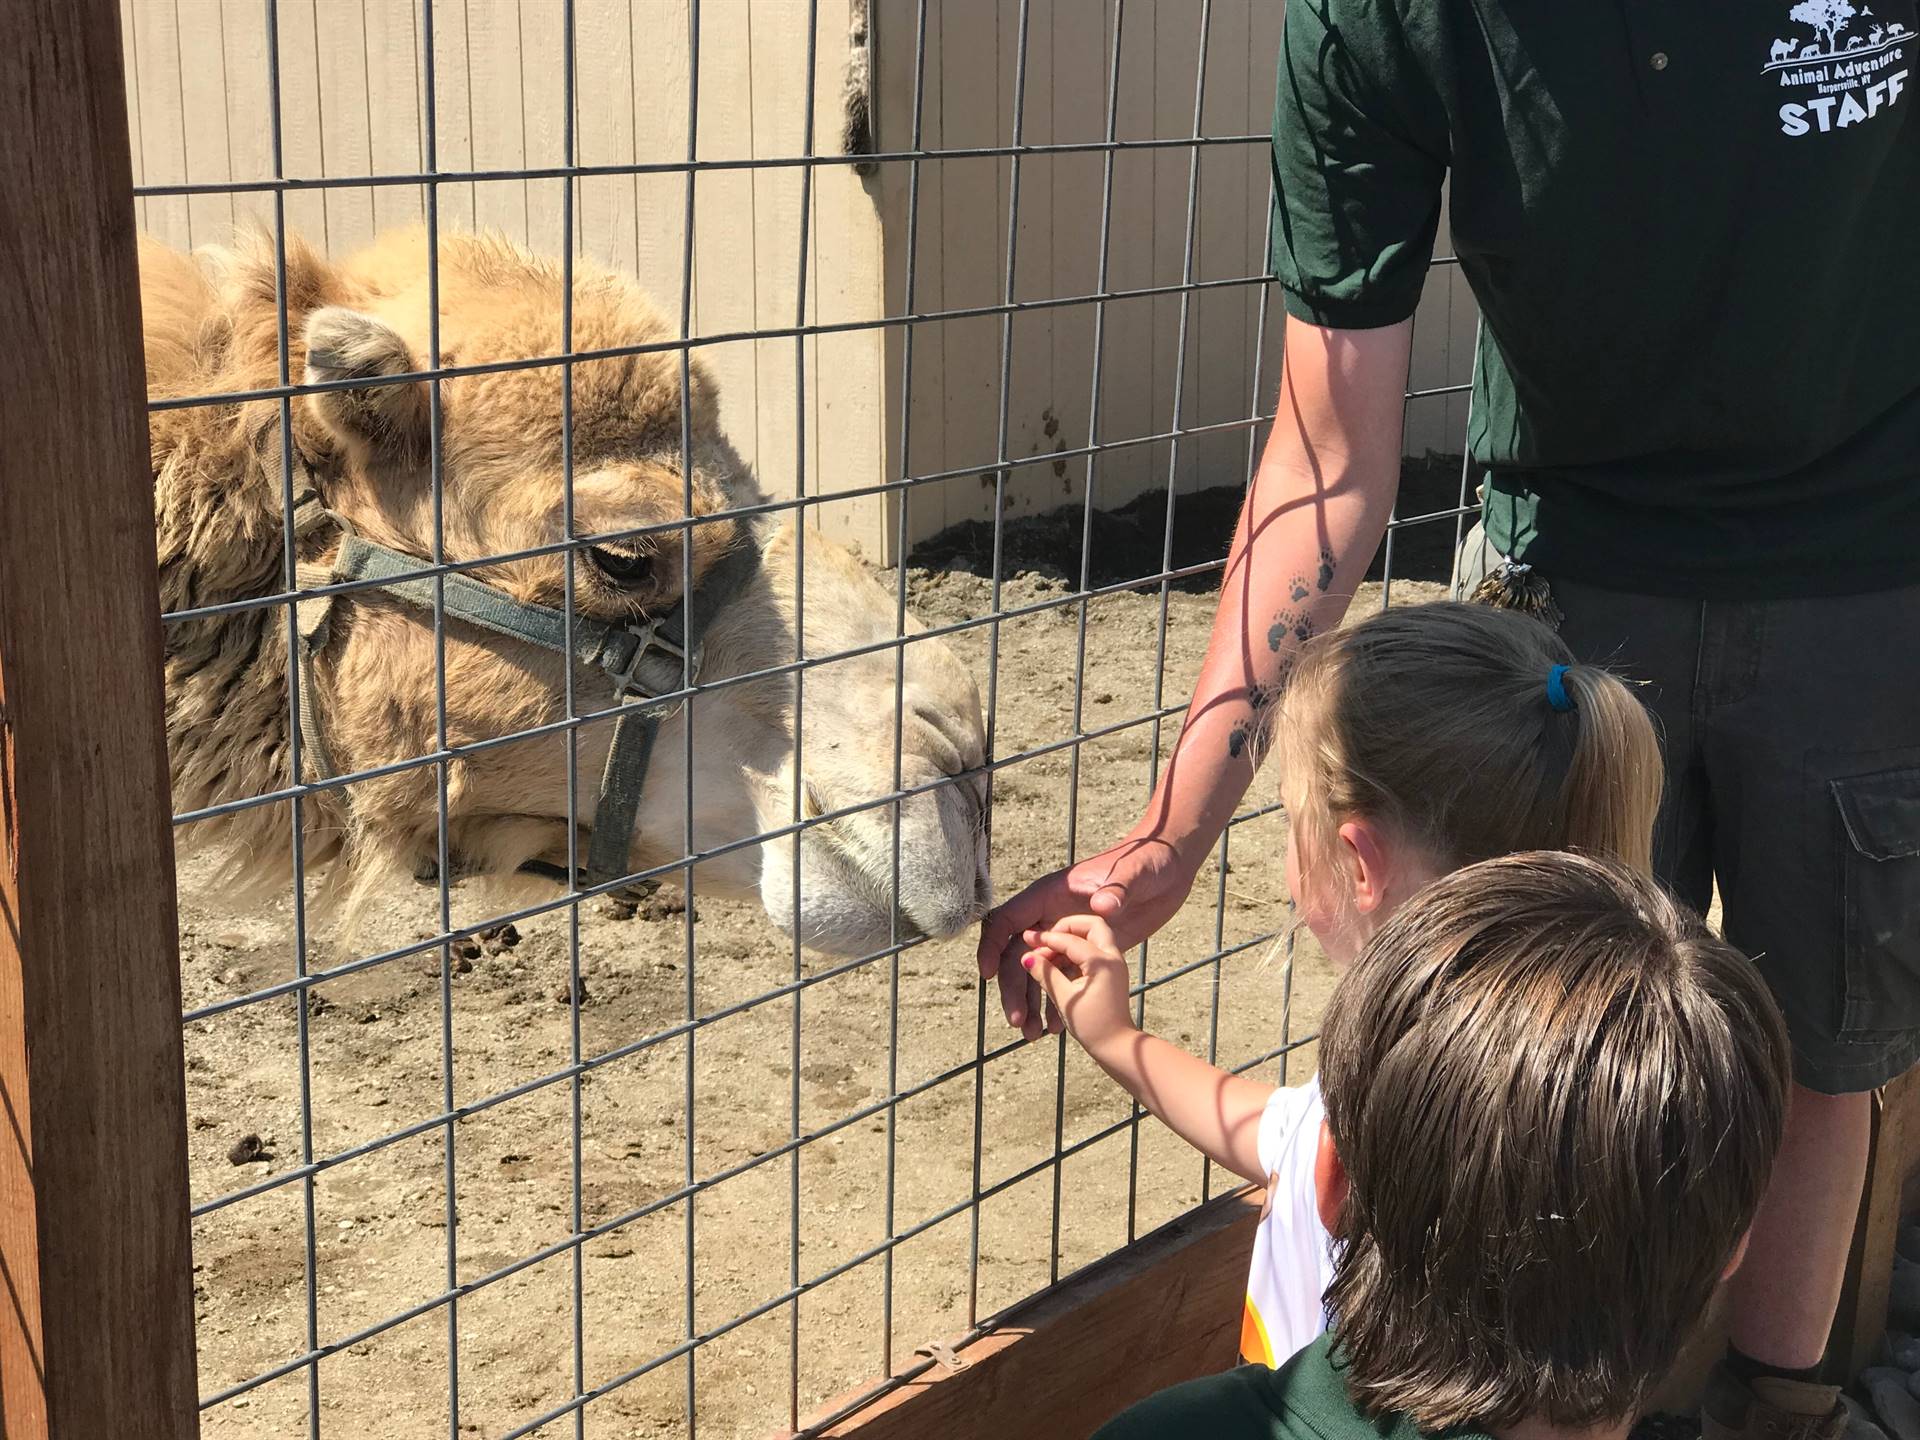 students take turns feeding a carrot to a camel